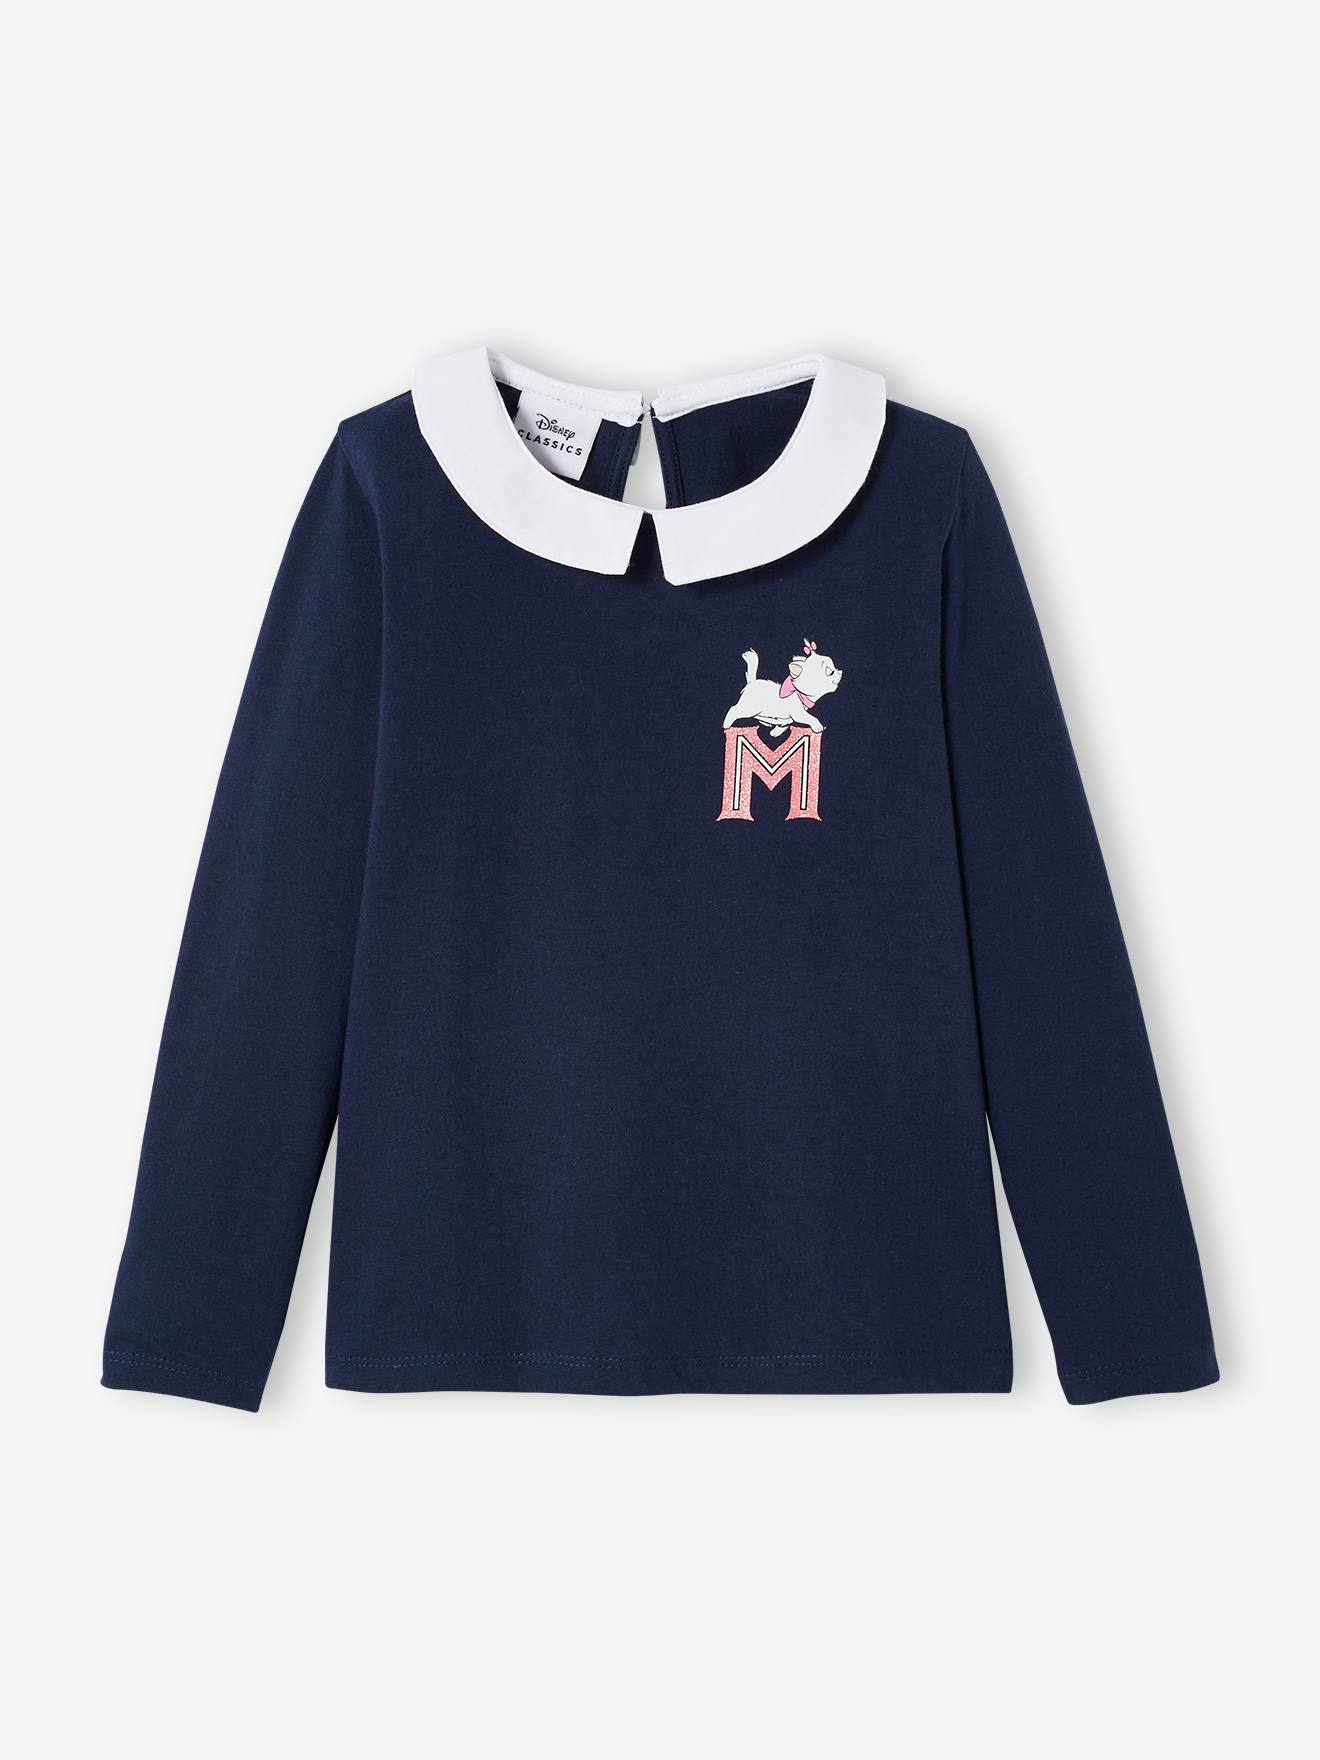 Long Sleeve Top with Marie of The Aristocats by Disney(r), for Girls blue dark solid with design